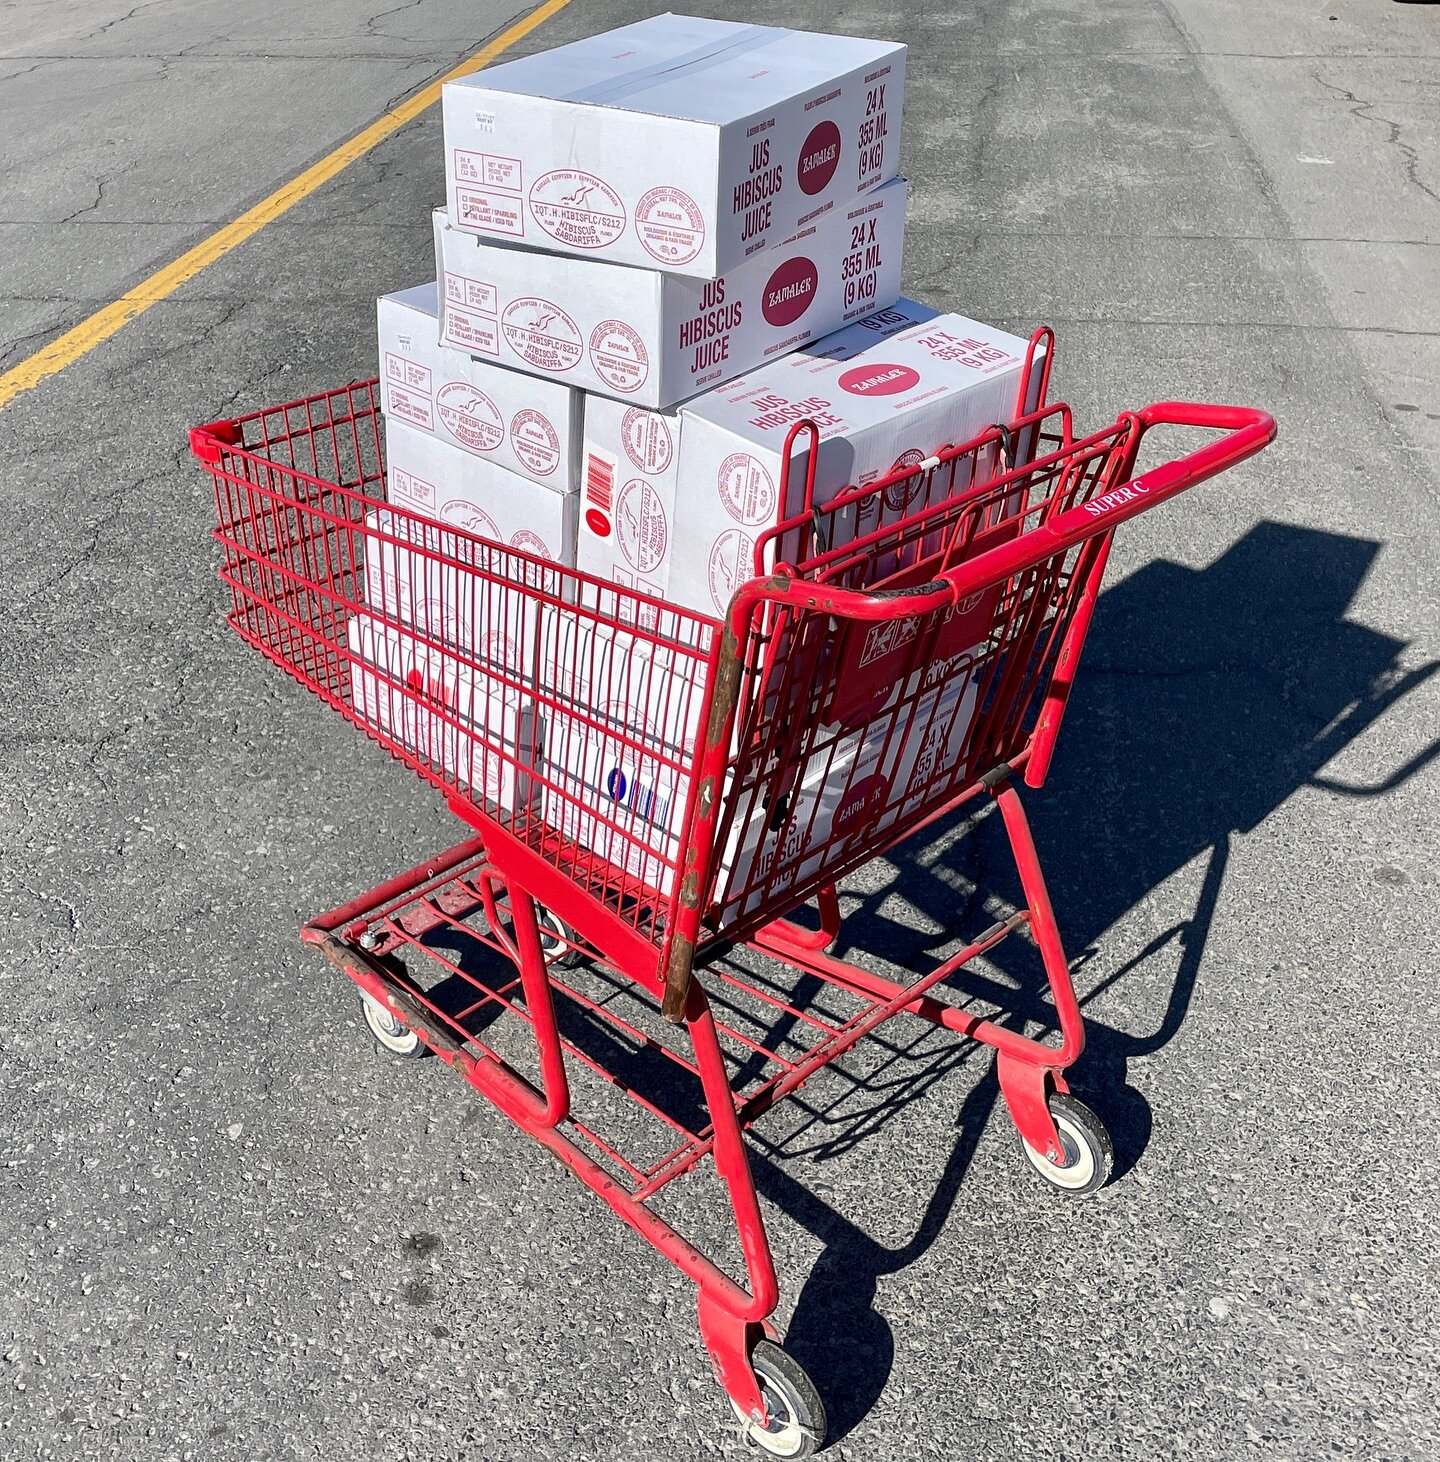 Faire ses courses avec style. Zamalek Super Cart for all your hydration needs. S/O to Messara Distribution and Patisserie Kol Chkor, the Dudemaine OGs